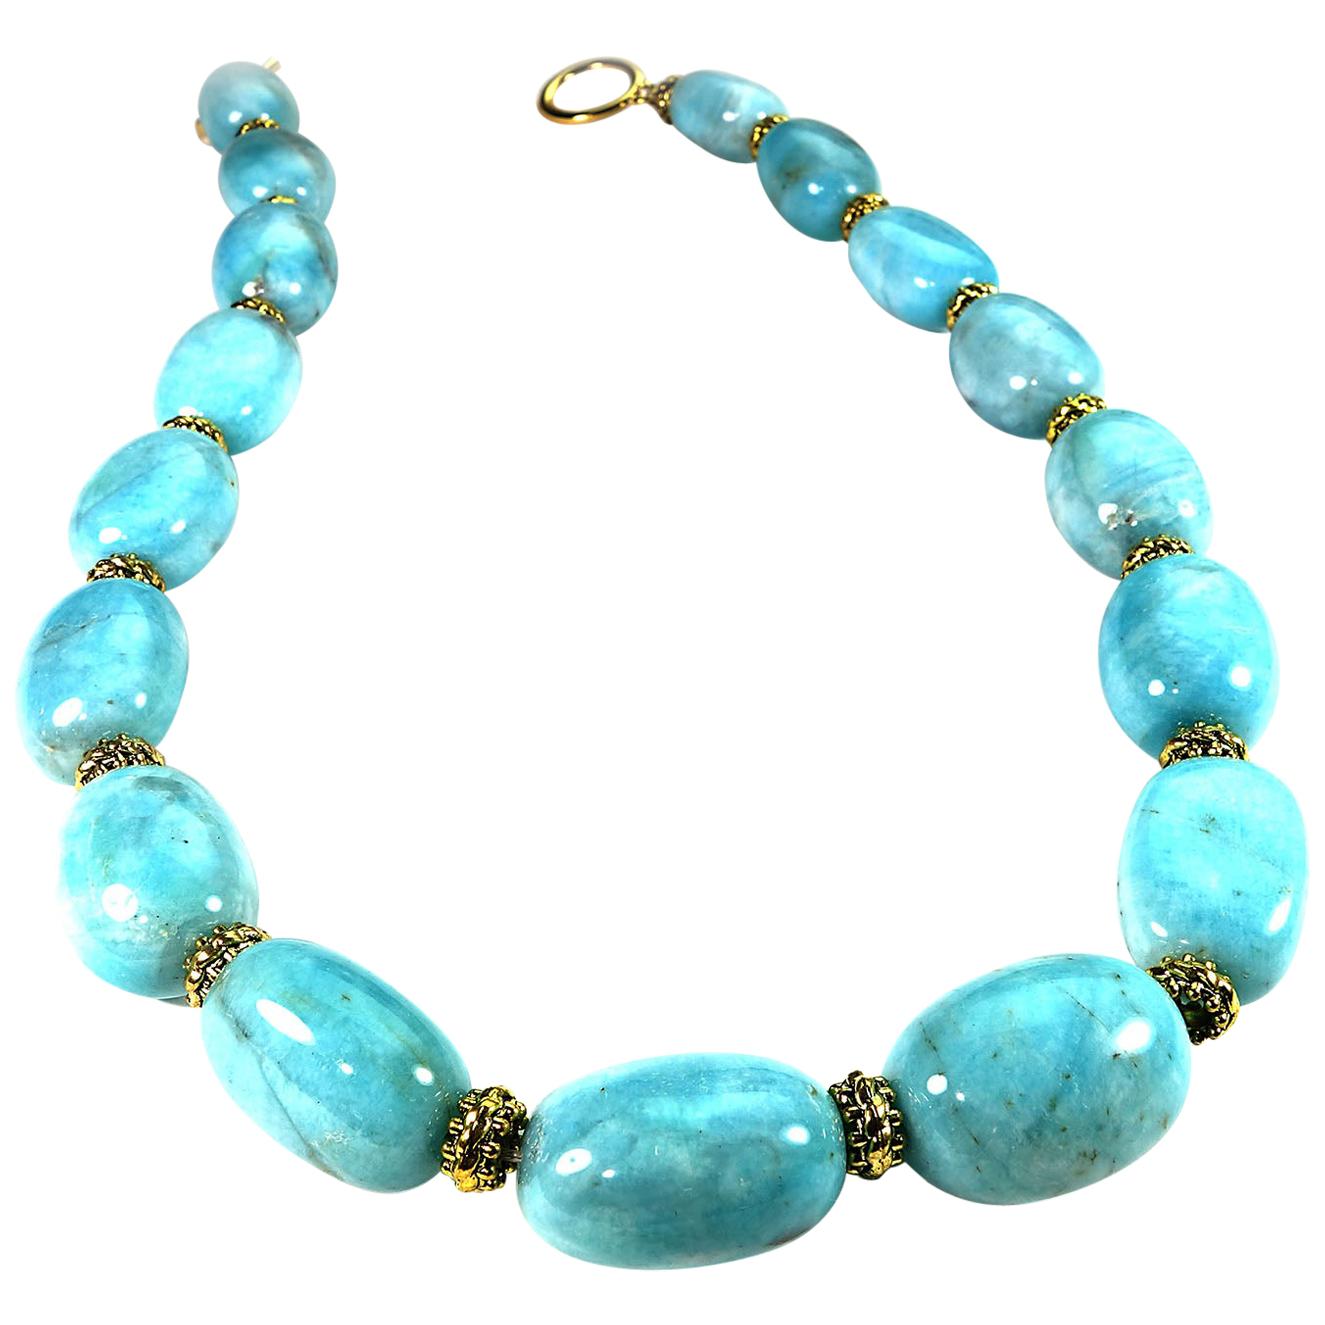 AJD 20 Inch Polished Amazonite Nugget Necklace with Bali Bead Accents